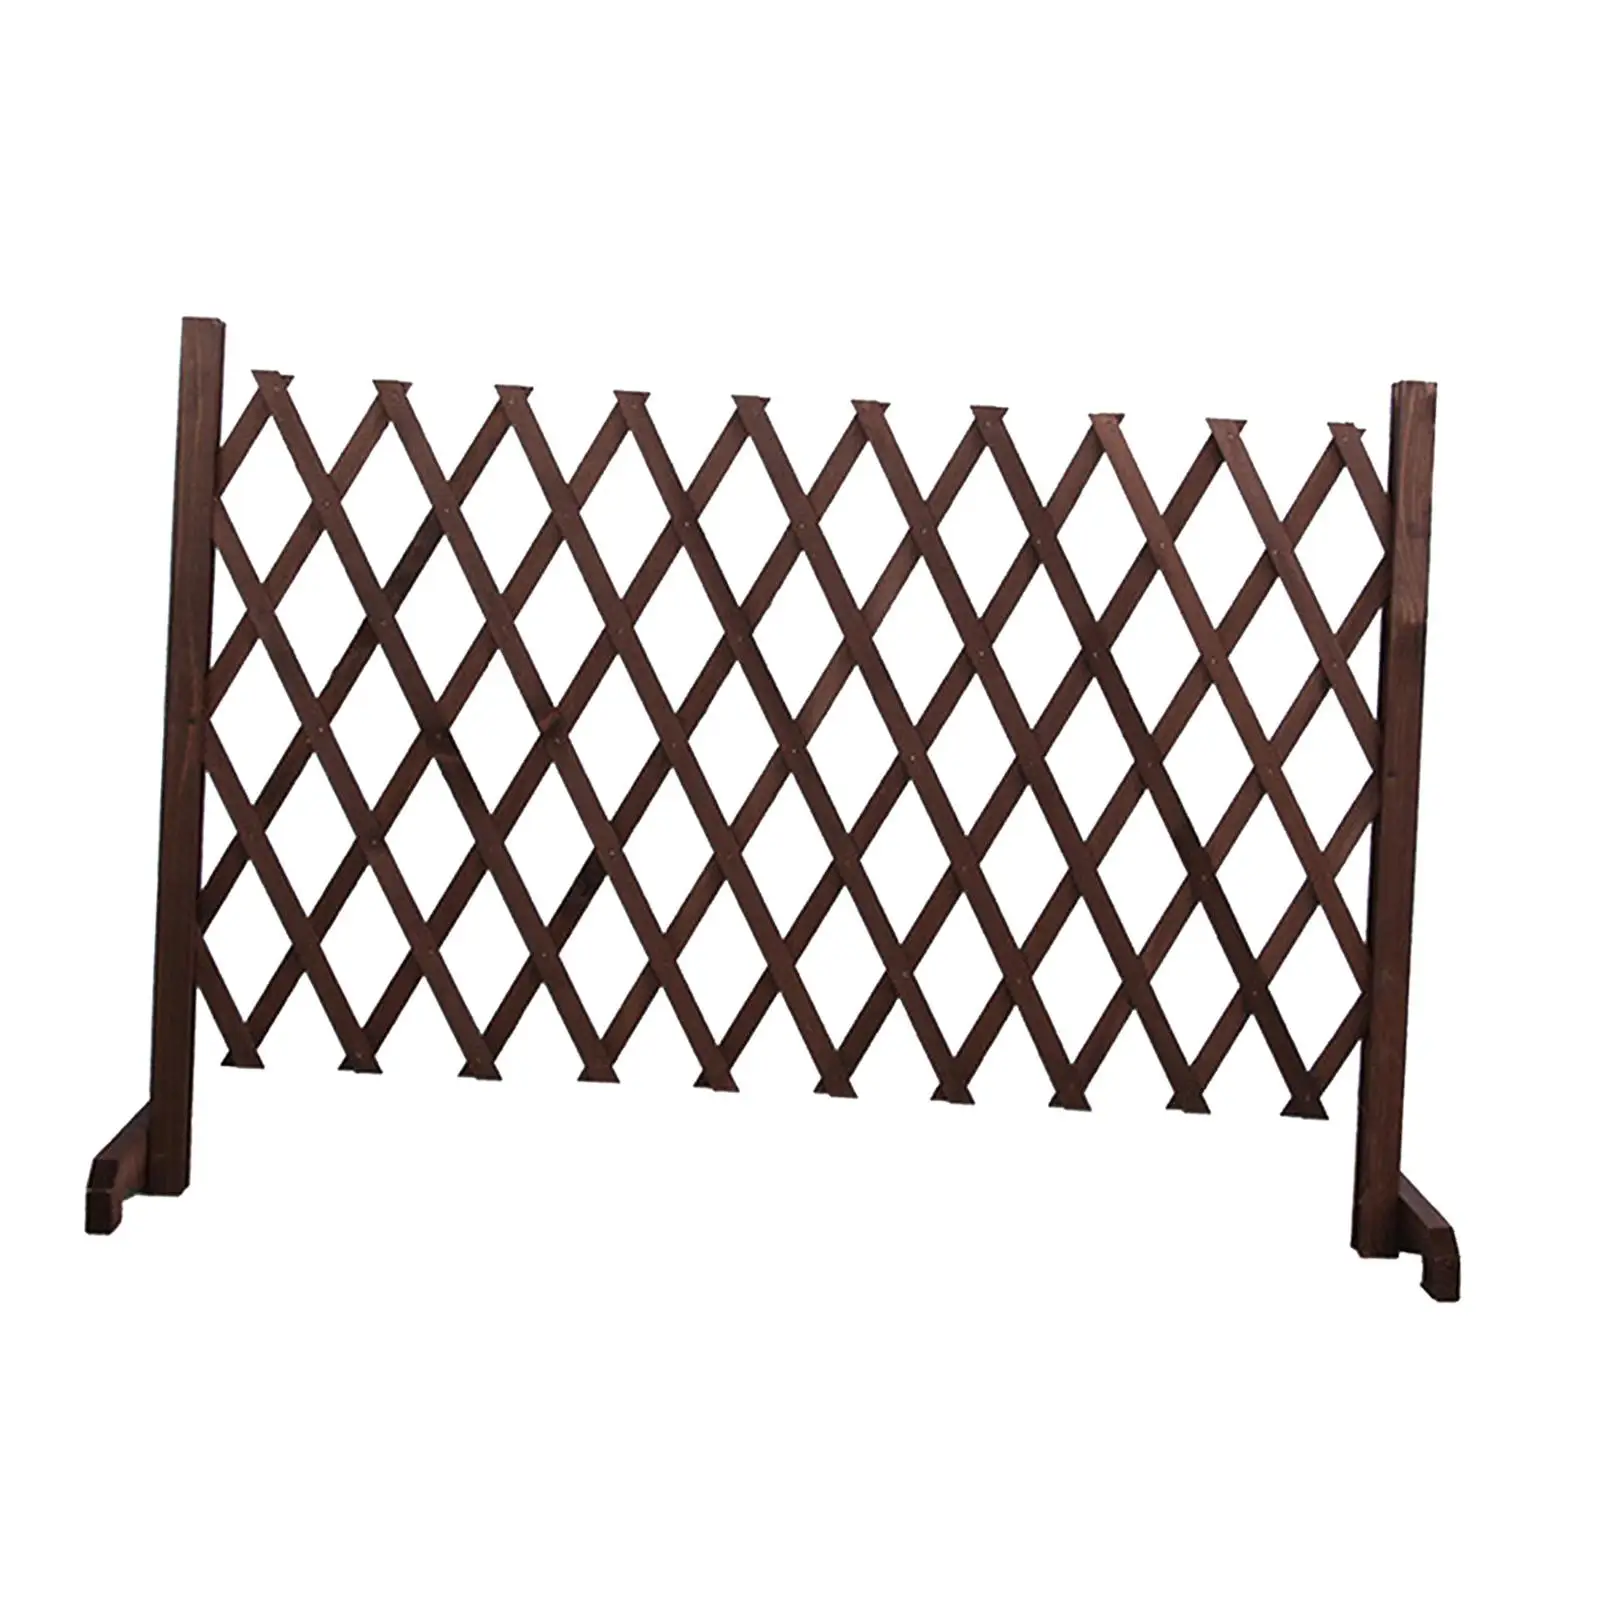 Wooden Dog Gate Expanding Retractable Barrier Folding Fence Pet Fence for Garden Lawn Doorway House Stairways Hall